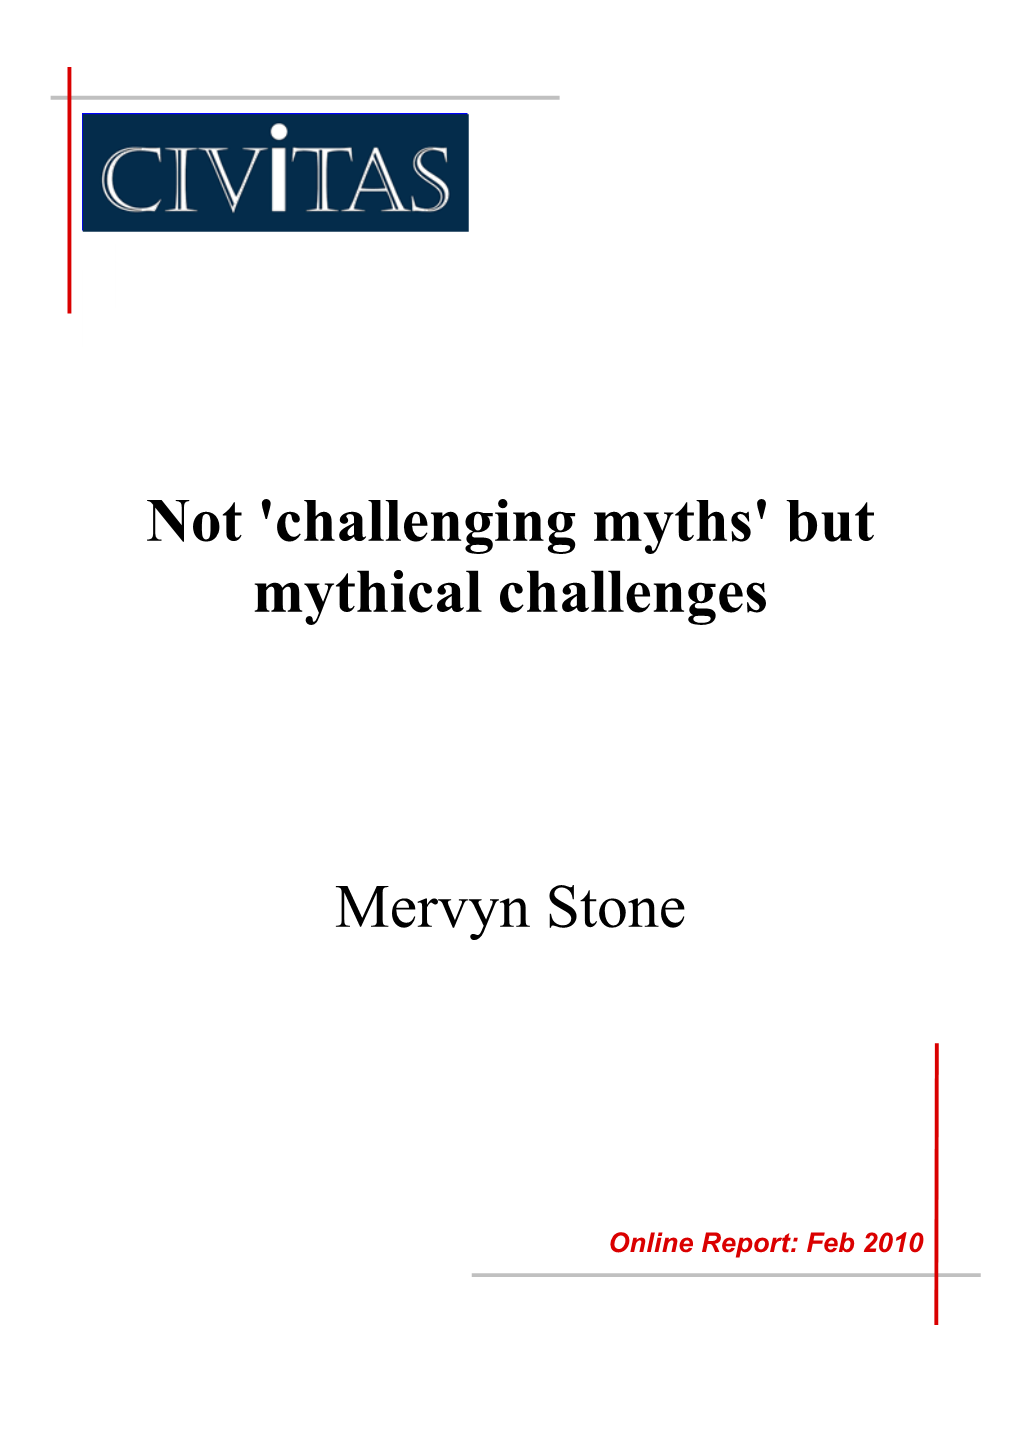 Not 'Challenging Myths' but Mythical Challenges